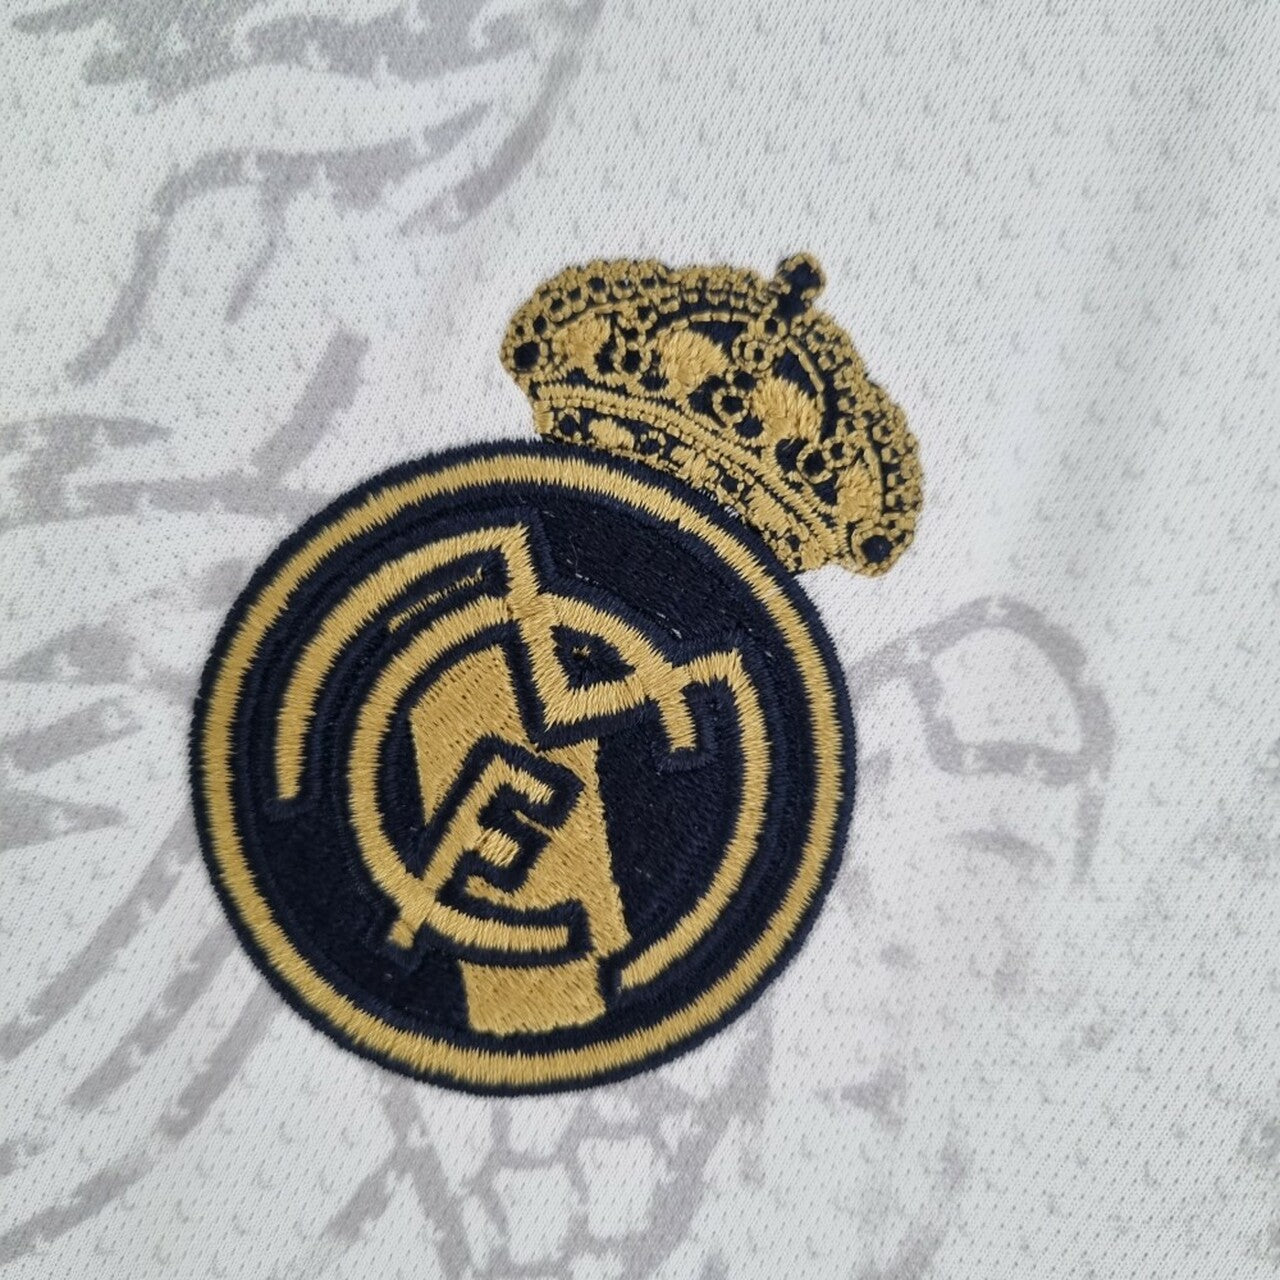 Real Madrid Chinese Dragon Concept